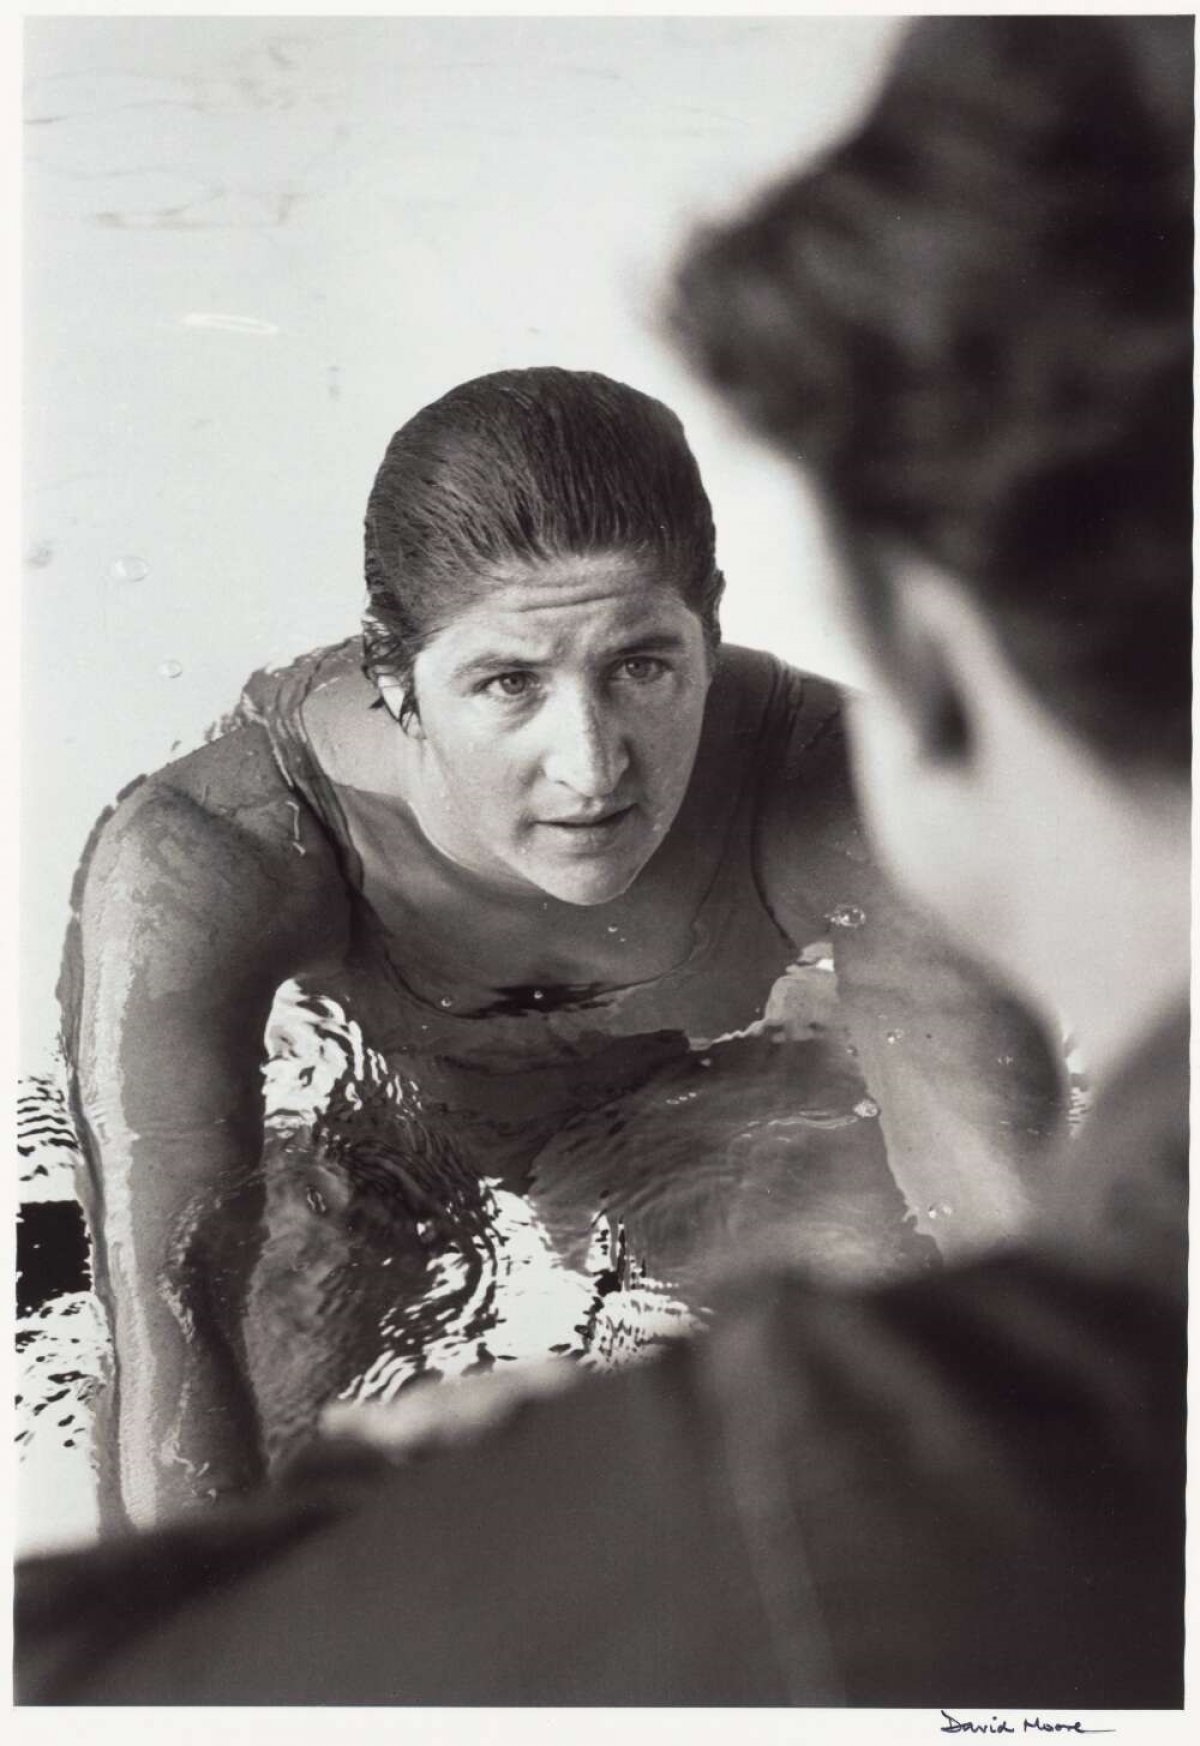 A black and white photo of Dawn Frazer looking up at a man from the pool, while she is talking to him.